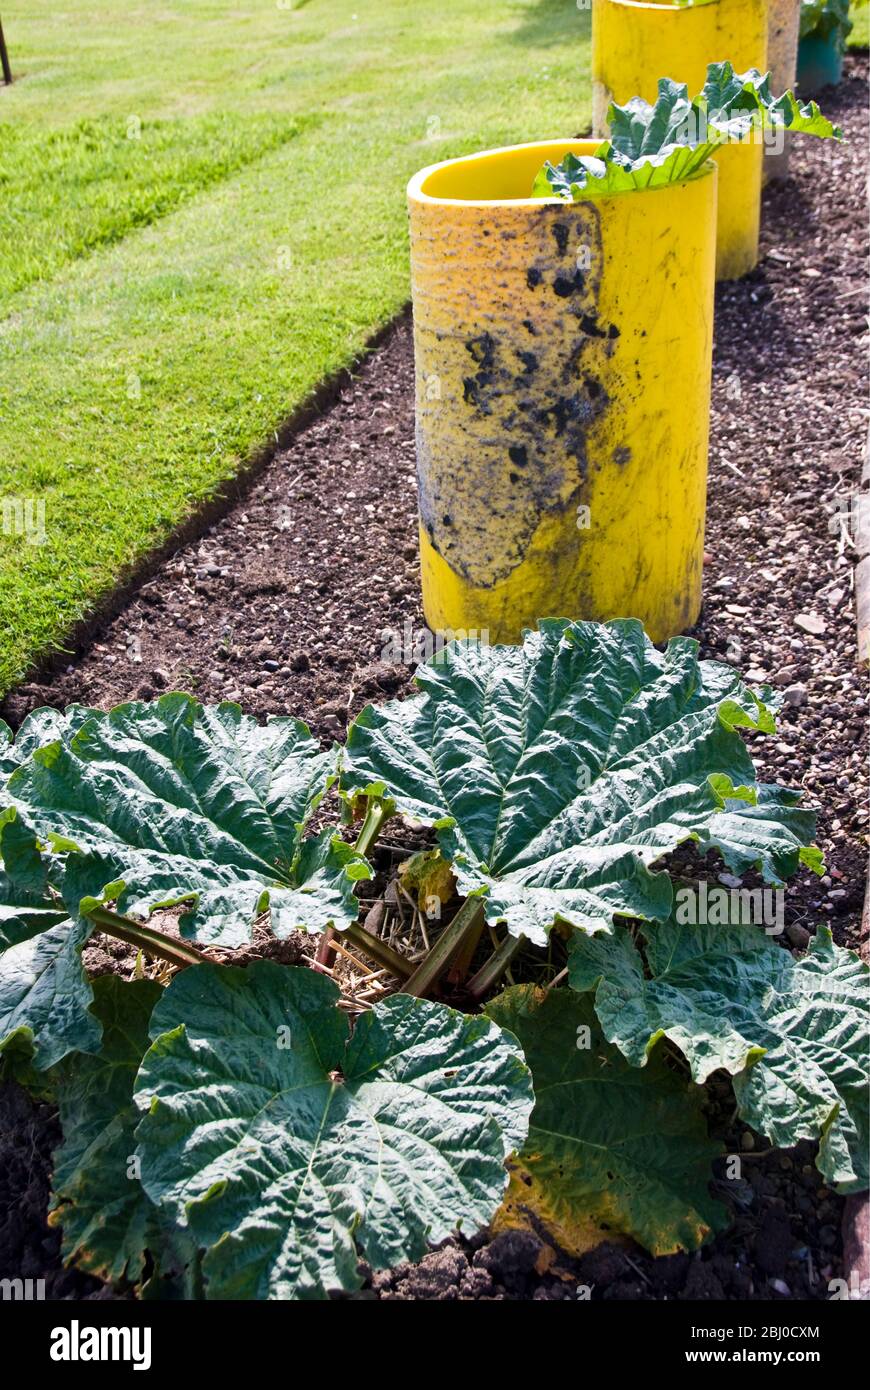 Rhubarb being grown with 'collars' to keep the stems paler and give them some protection - Stock Photo